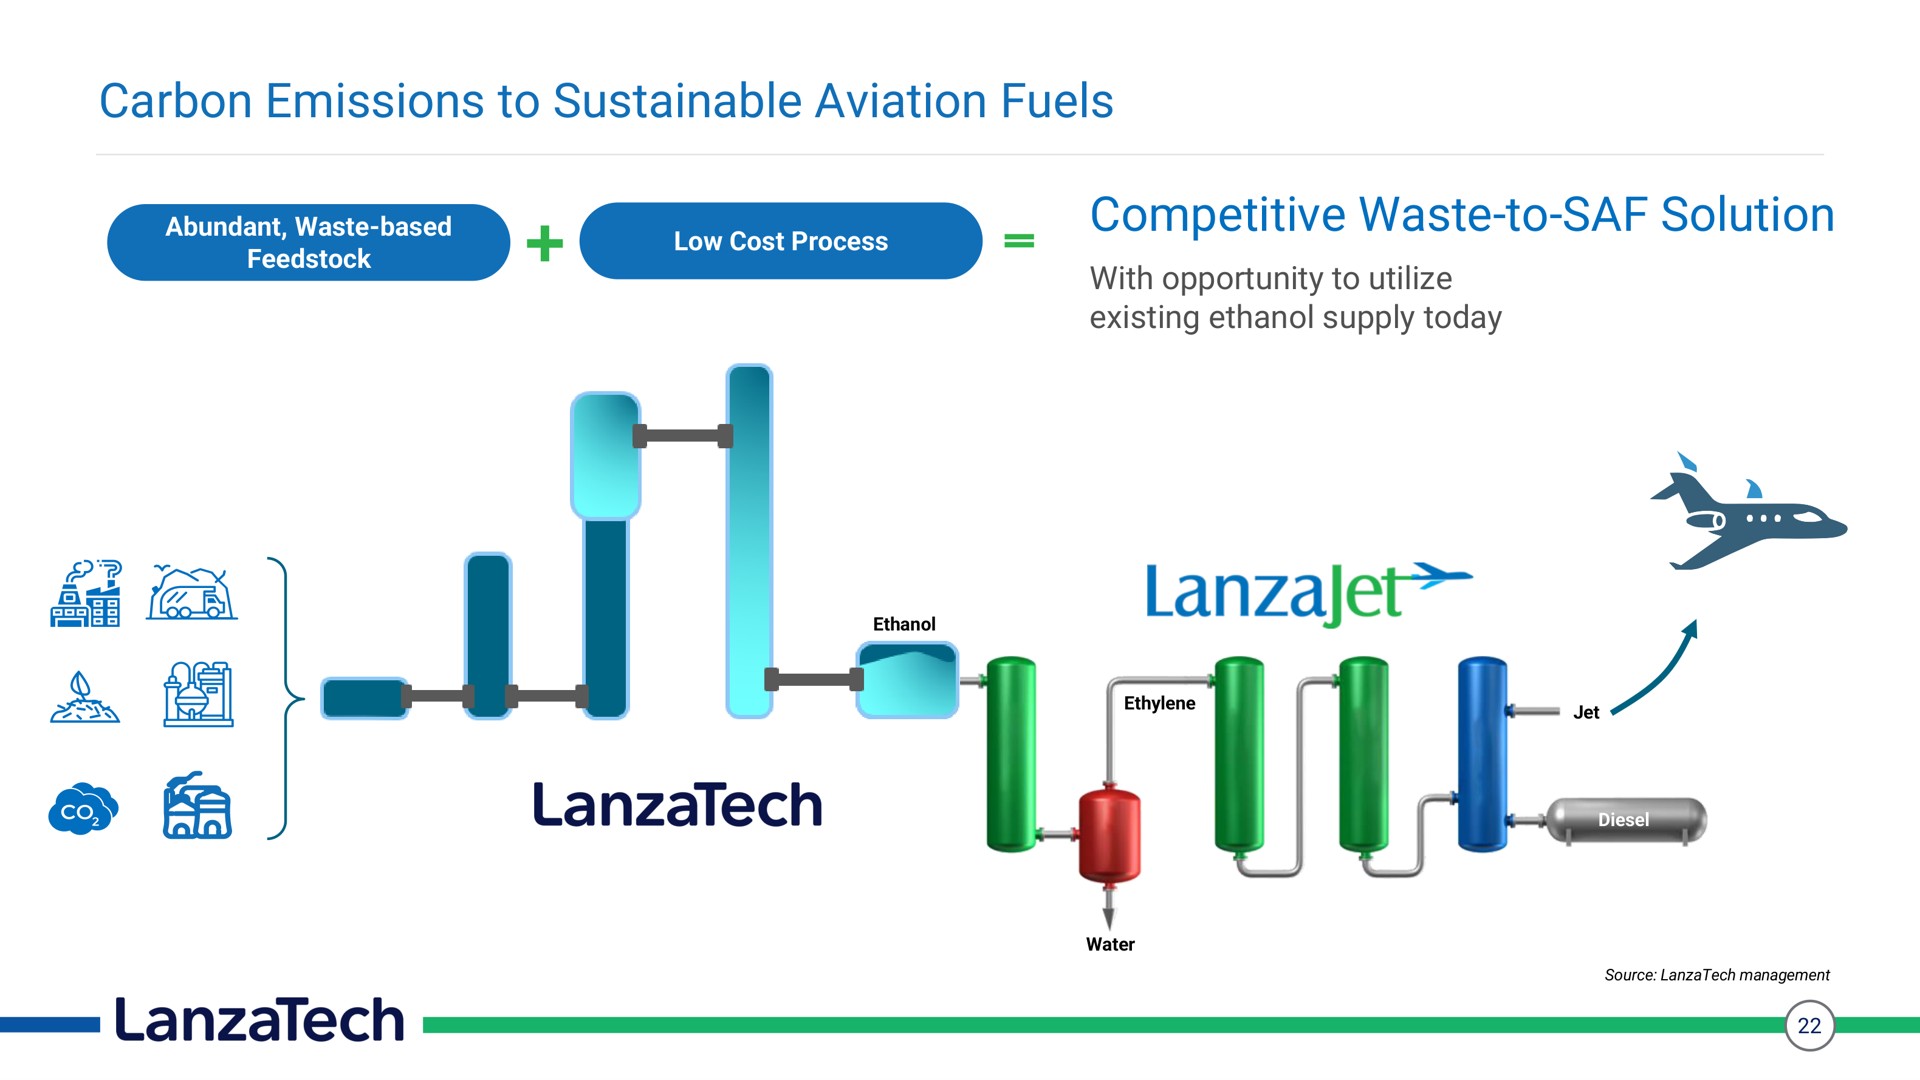 carbon emissions to sustainable aviation fuels competitive waste to solution ethylene | LanzaTech